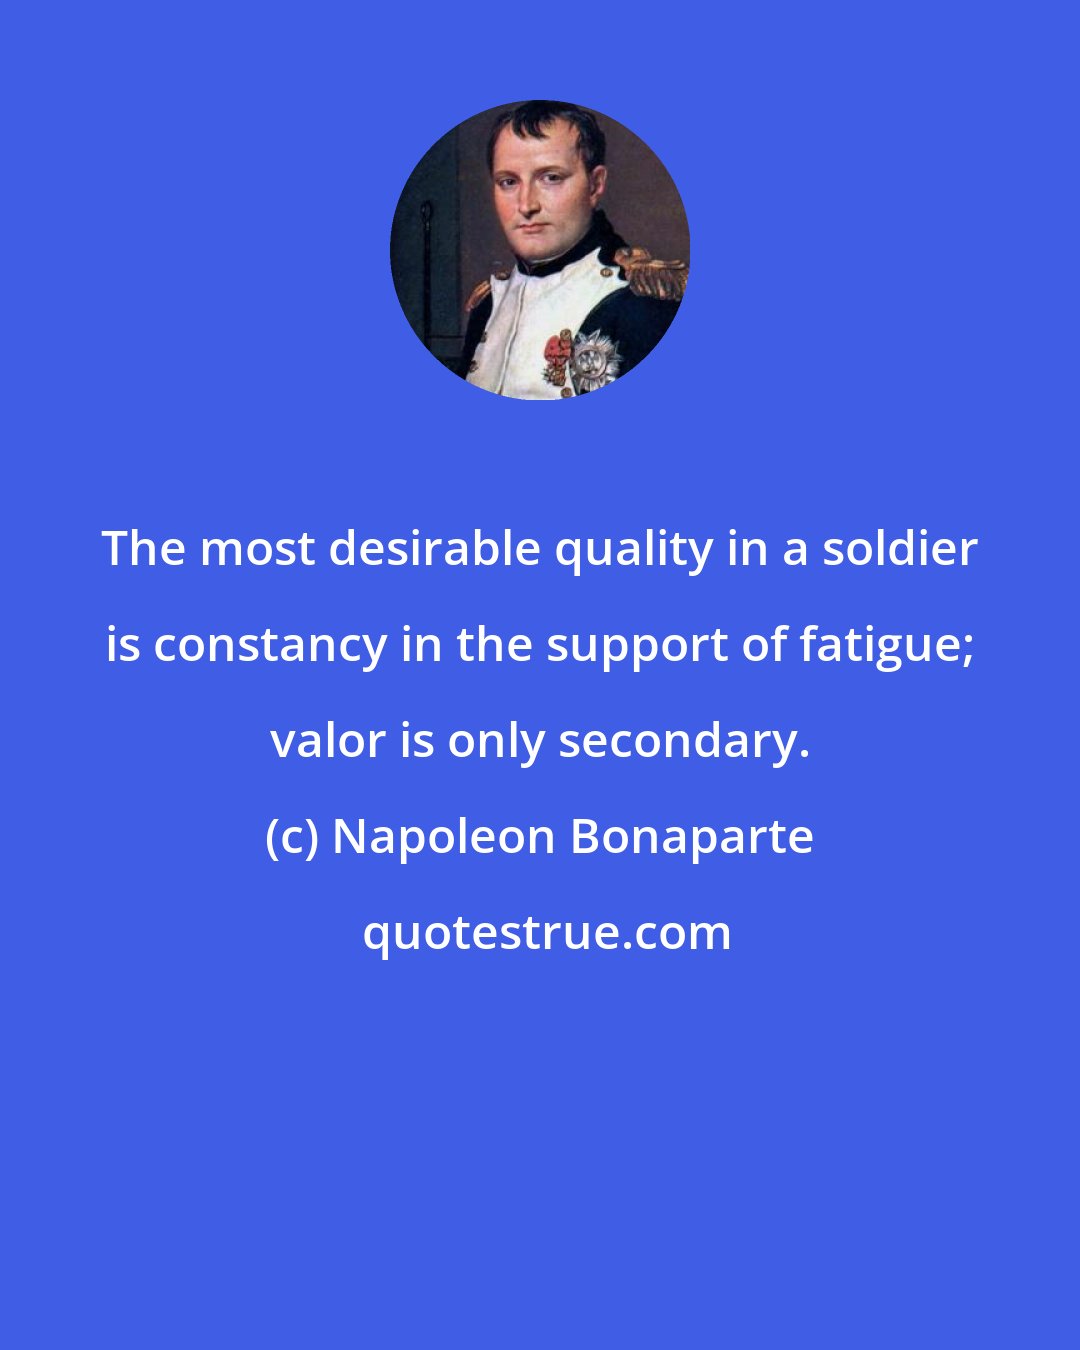 Napoleon Bonaparte: The most desirable quality in a soldier is constancy in the support of fatigue; valor is only secondary.